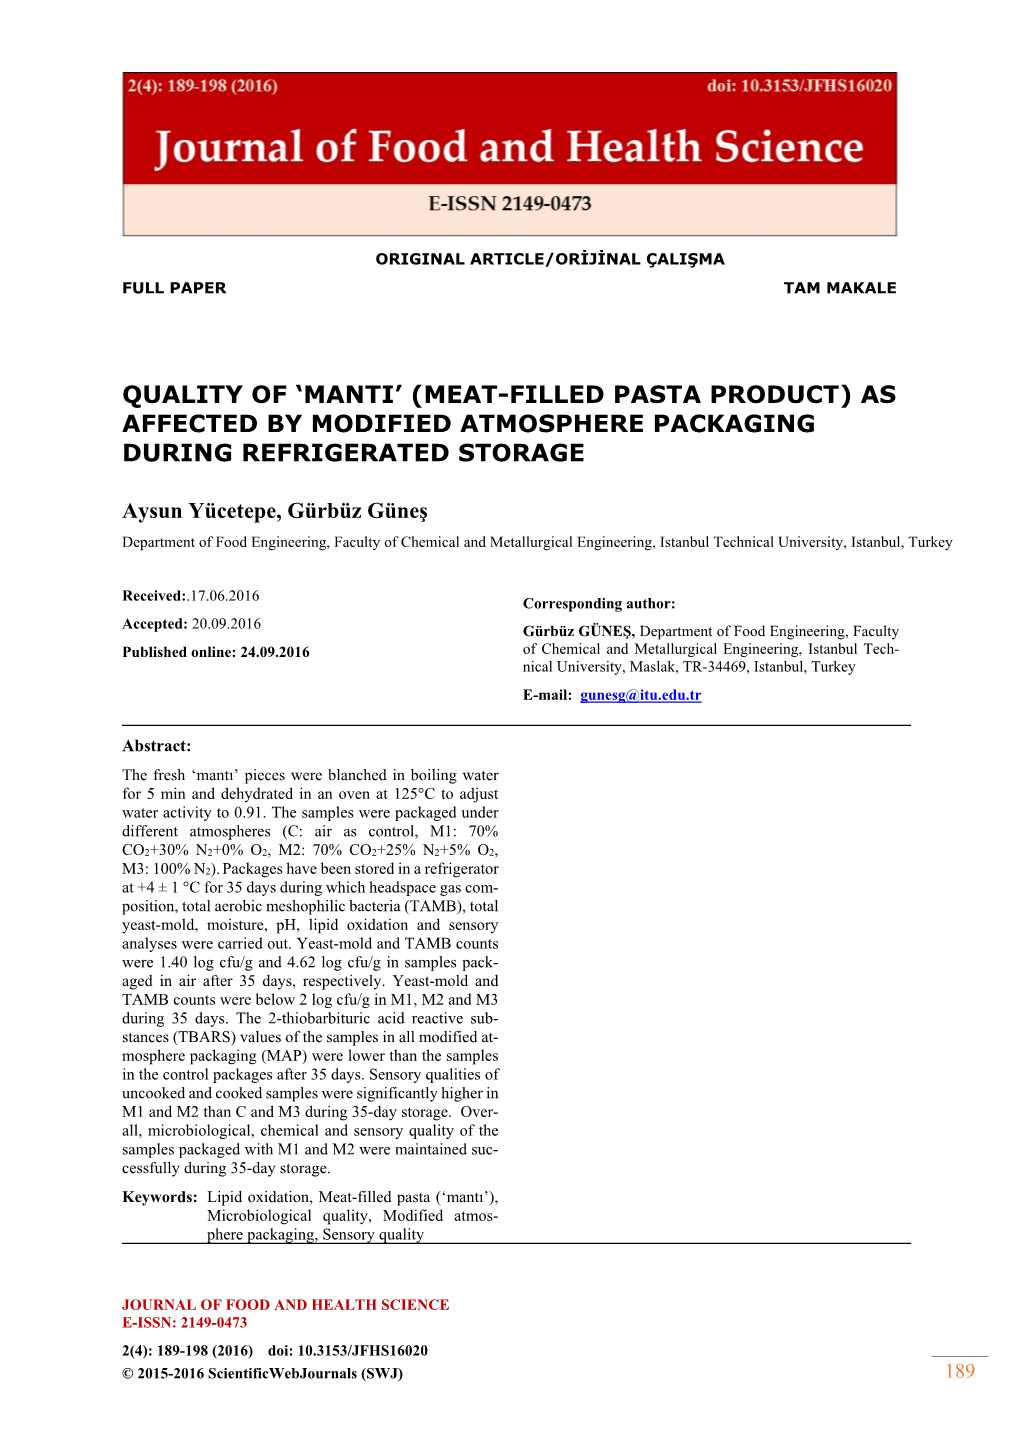 Quality of 'Manti' (Meat-Filled Pasta